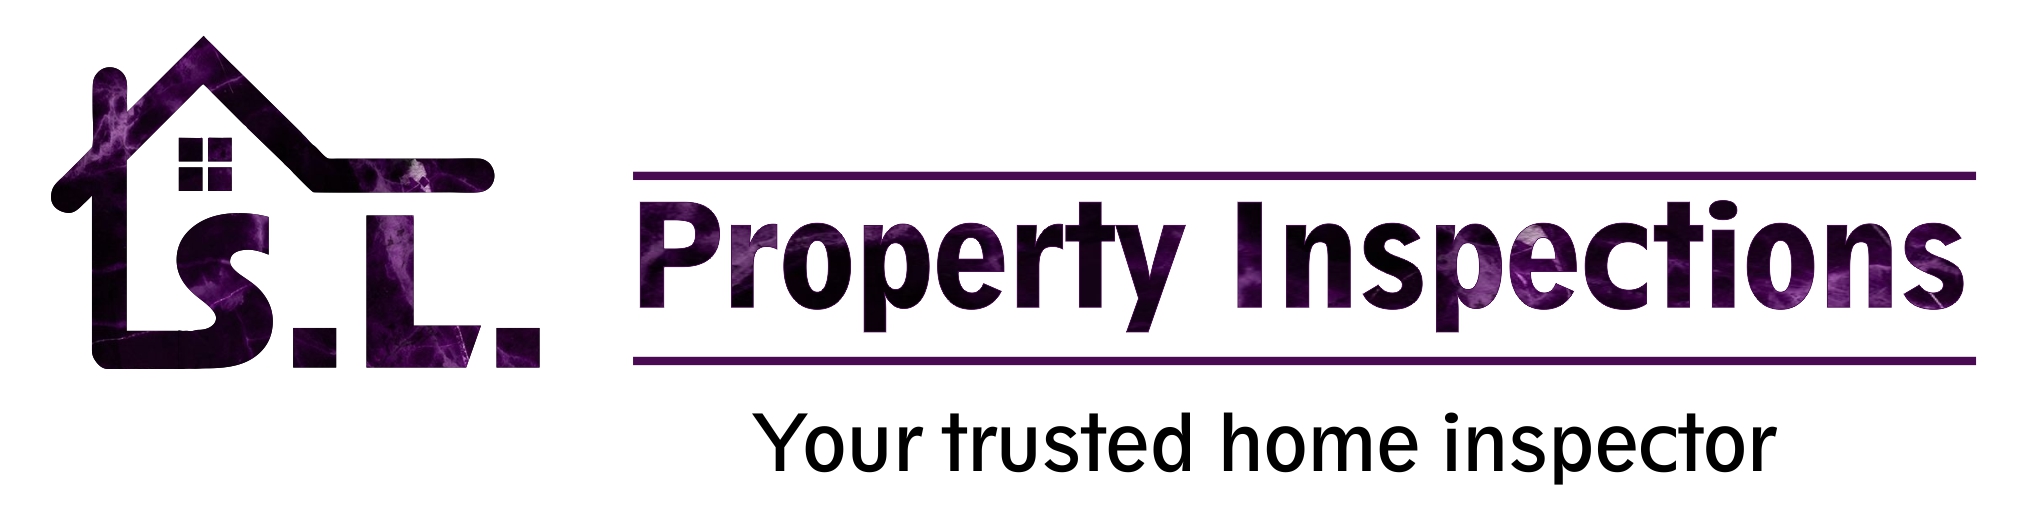 S.L. Property Inspections